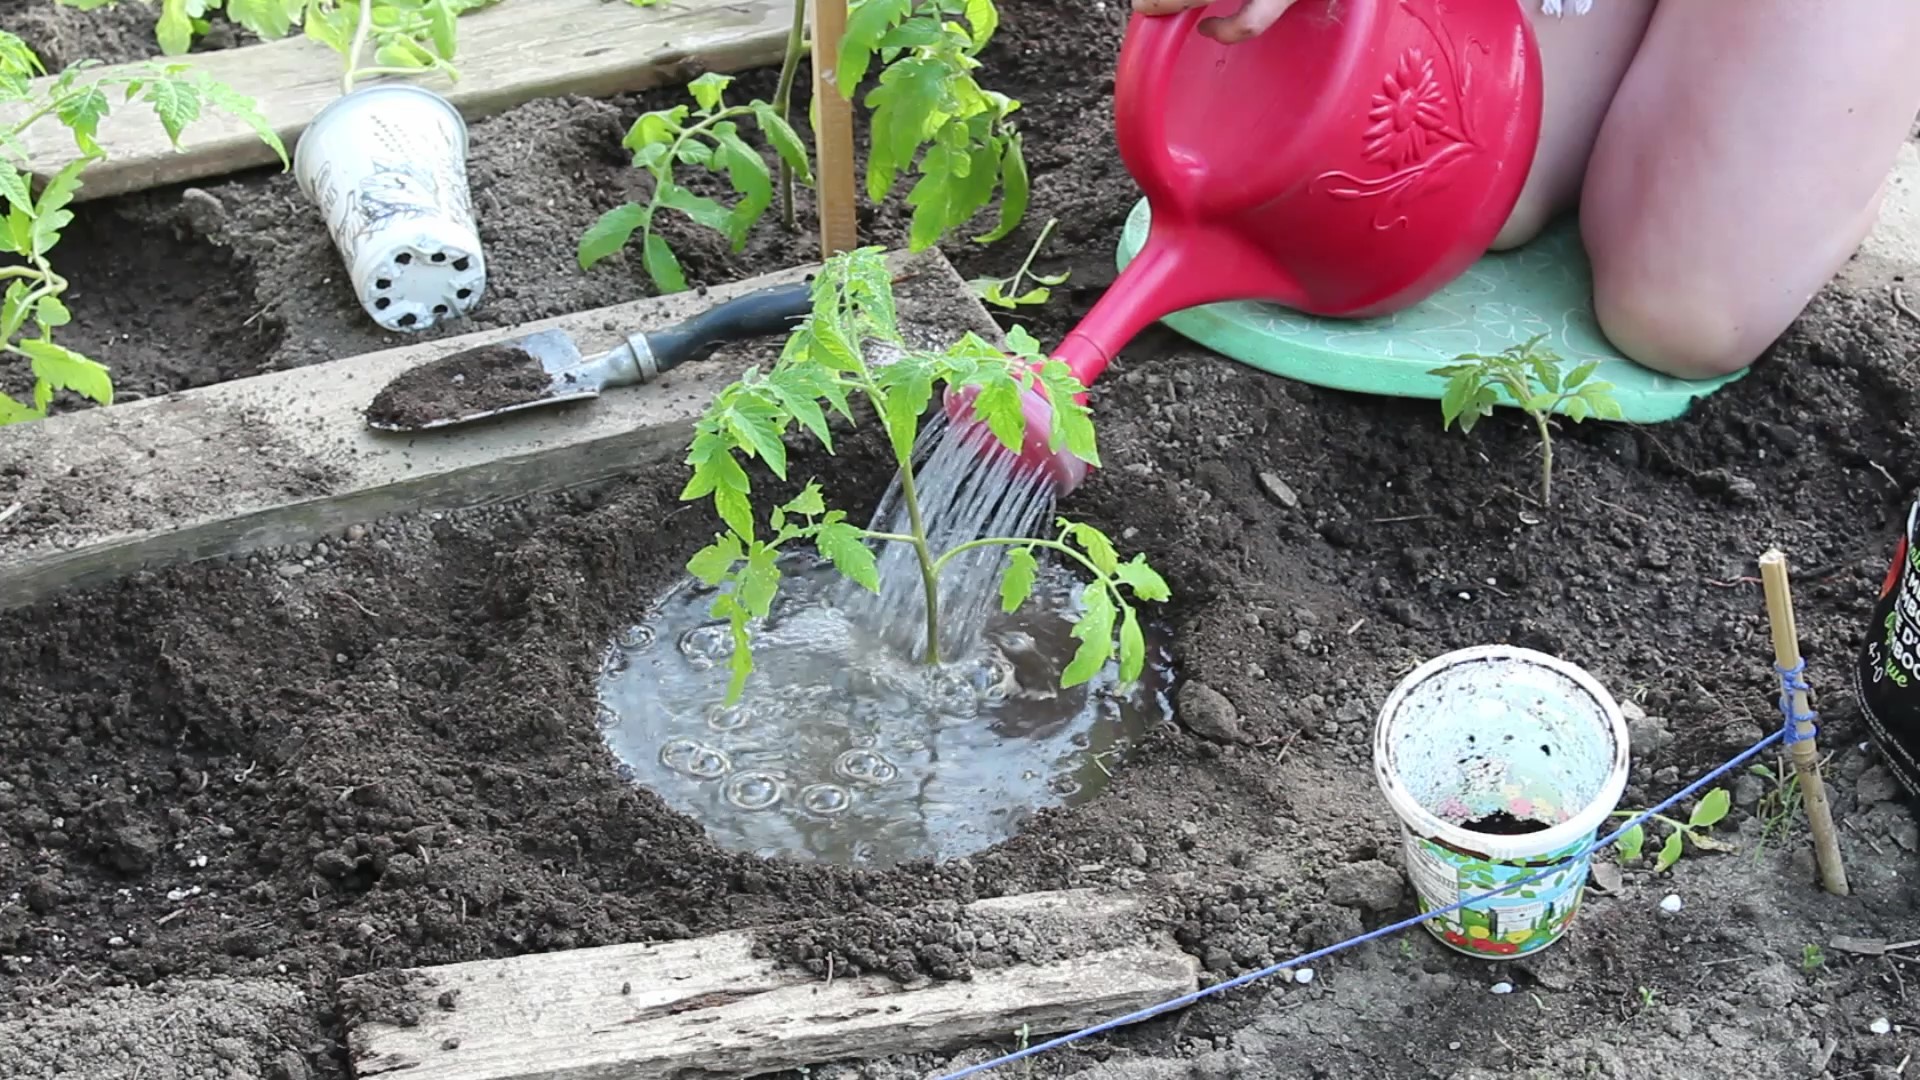 Watering newly planted tomato plant 2020